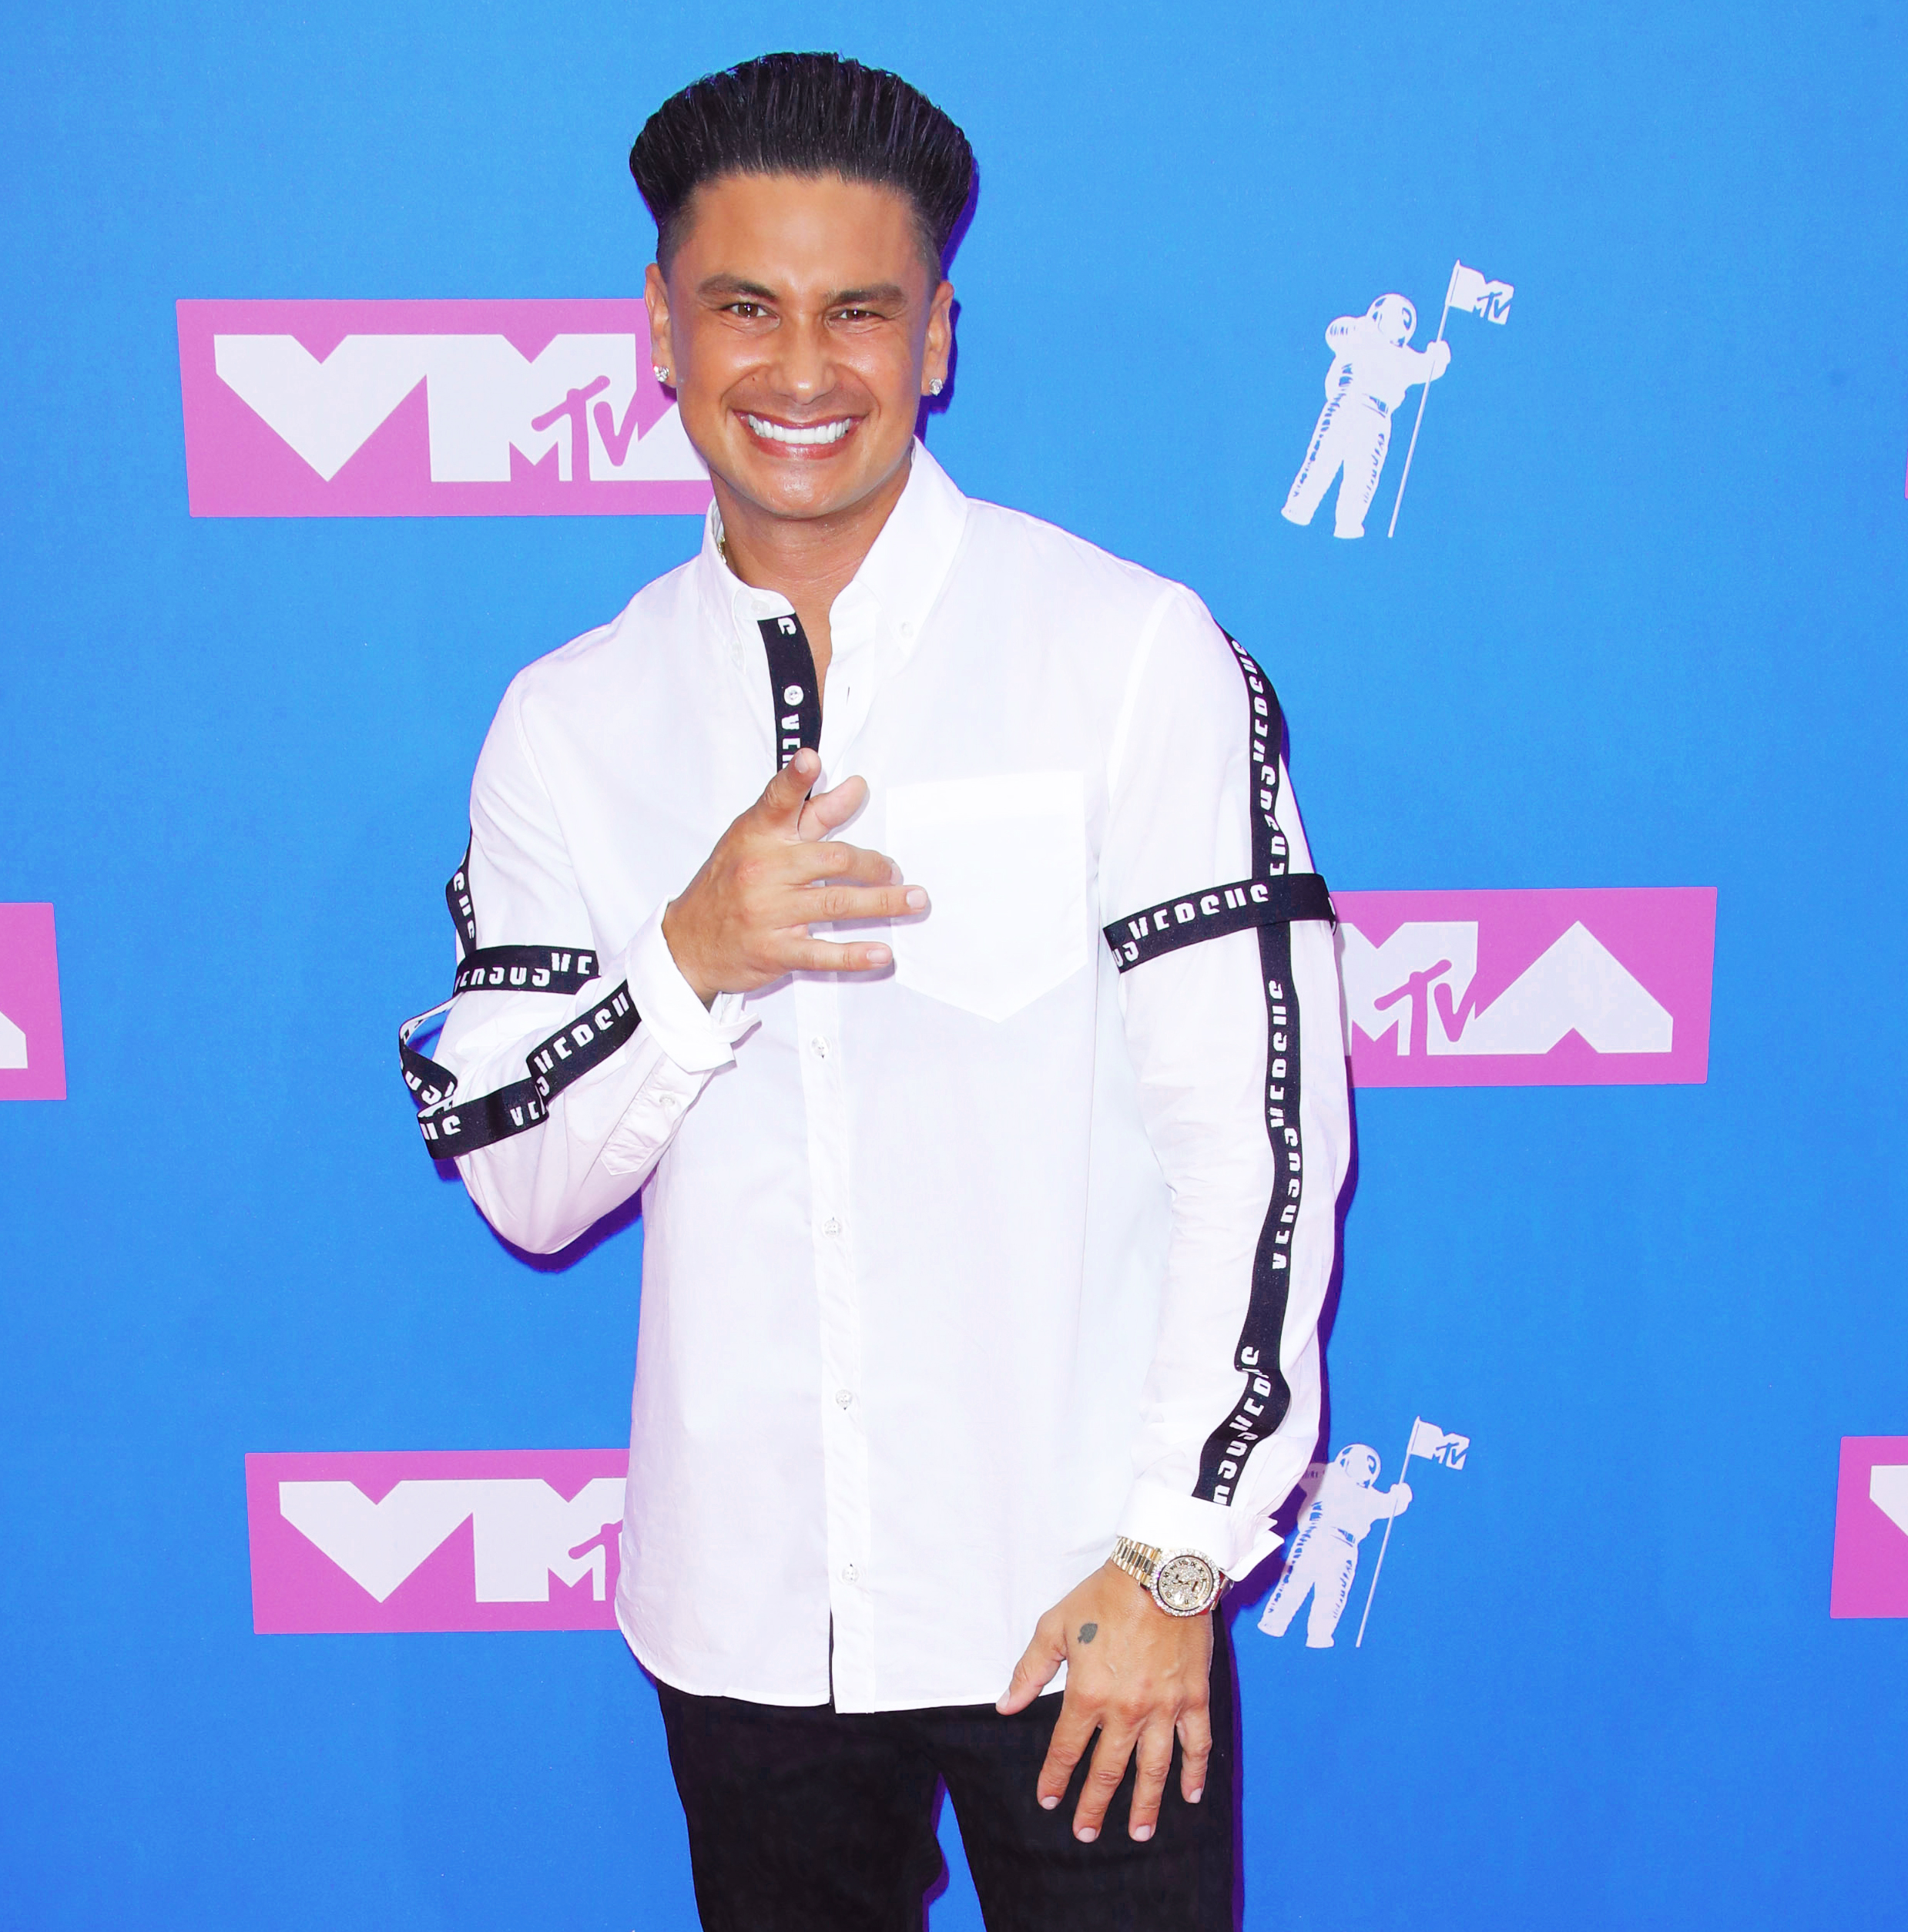 Jersey Shore's Pauly D Is Unrecognizable With 'Quarantine Beard'